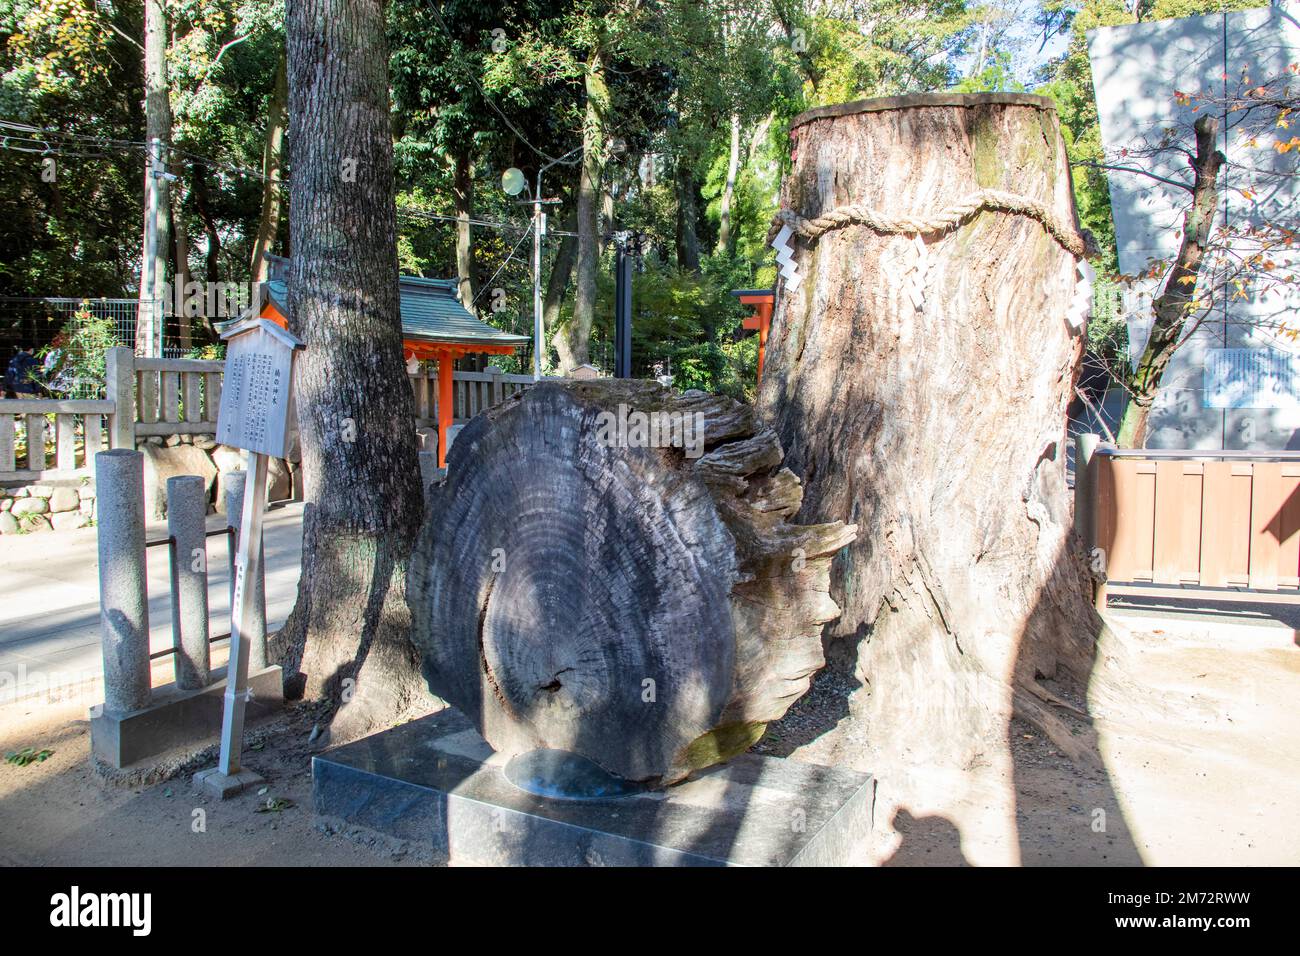 Kobe Japan Dec 6th 2022: the 500 year old Phoebe zhennan tree and stump in Ikuta Shrine.  The shrine is possibly among the oldest shrines. Stock Photo